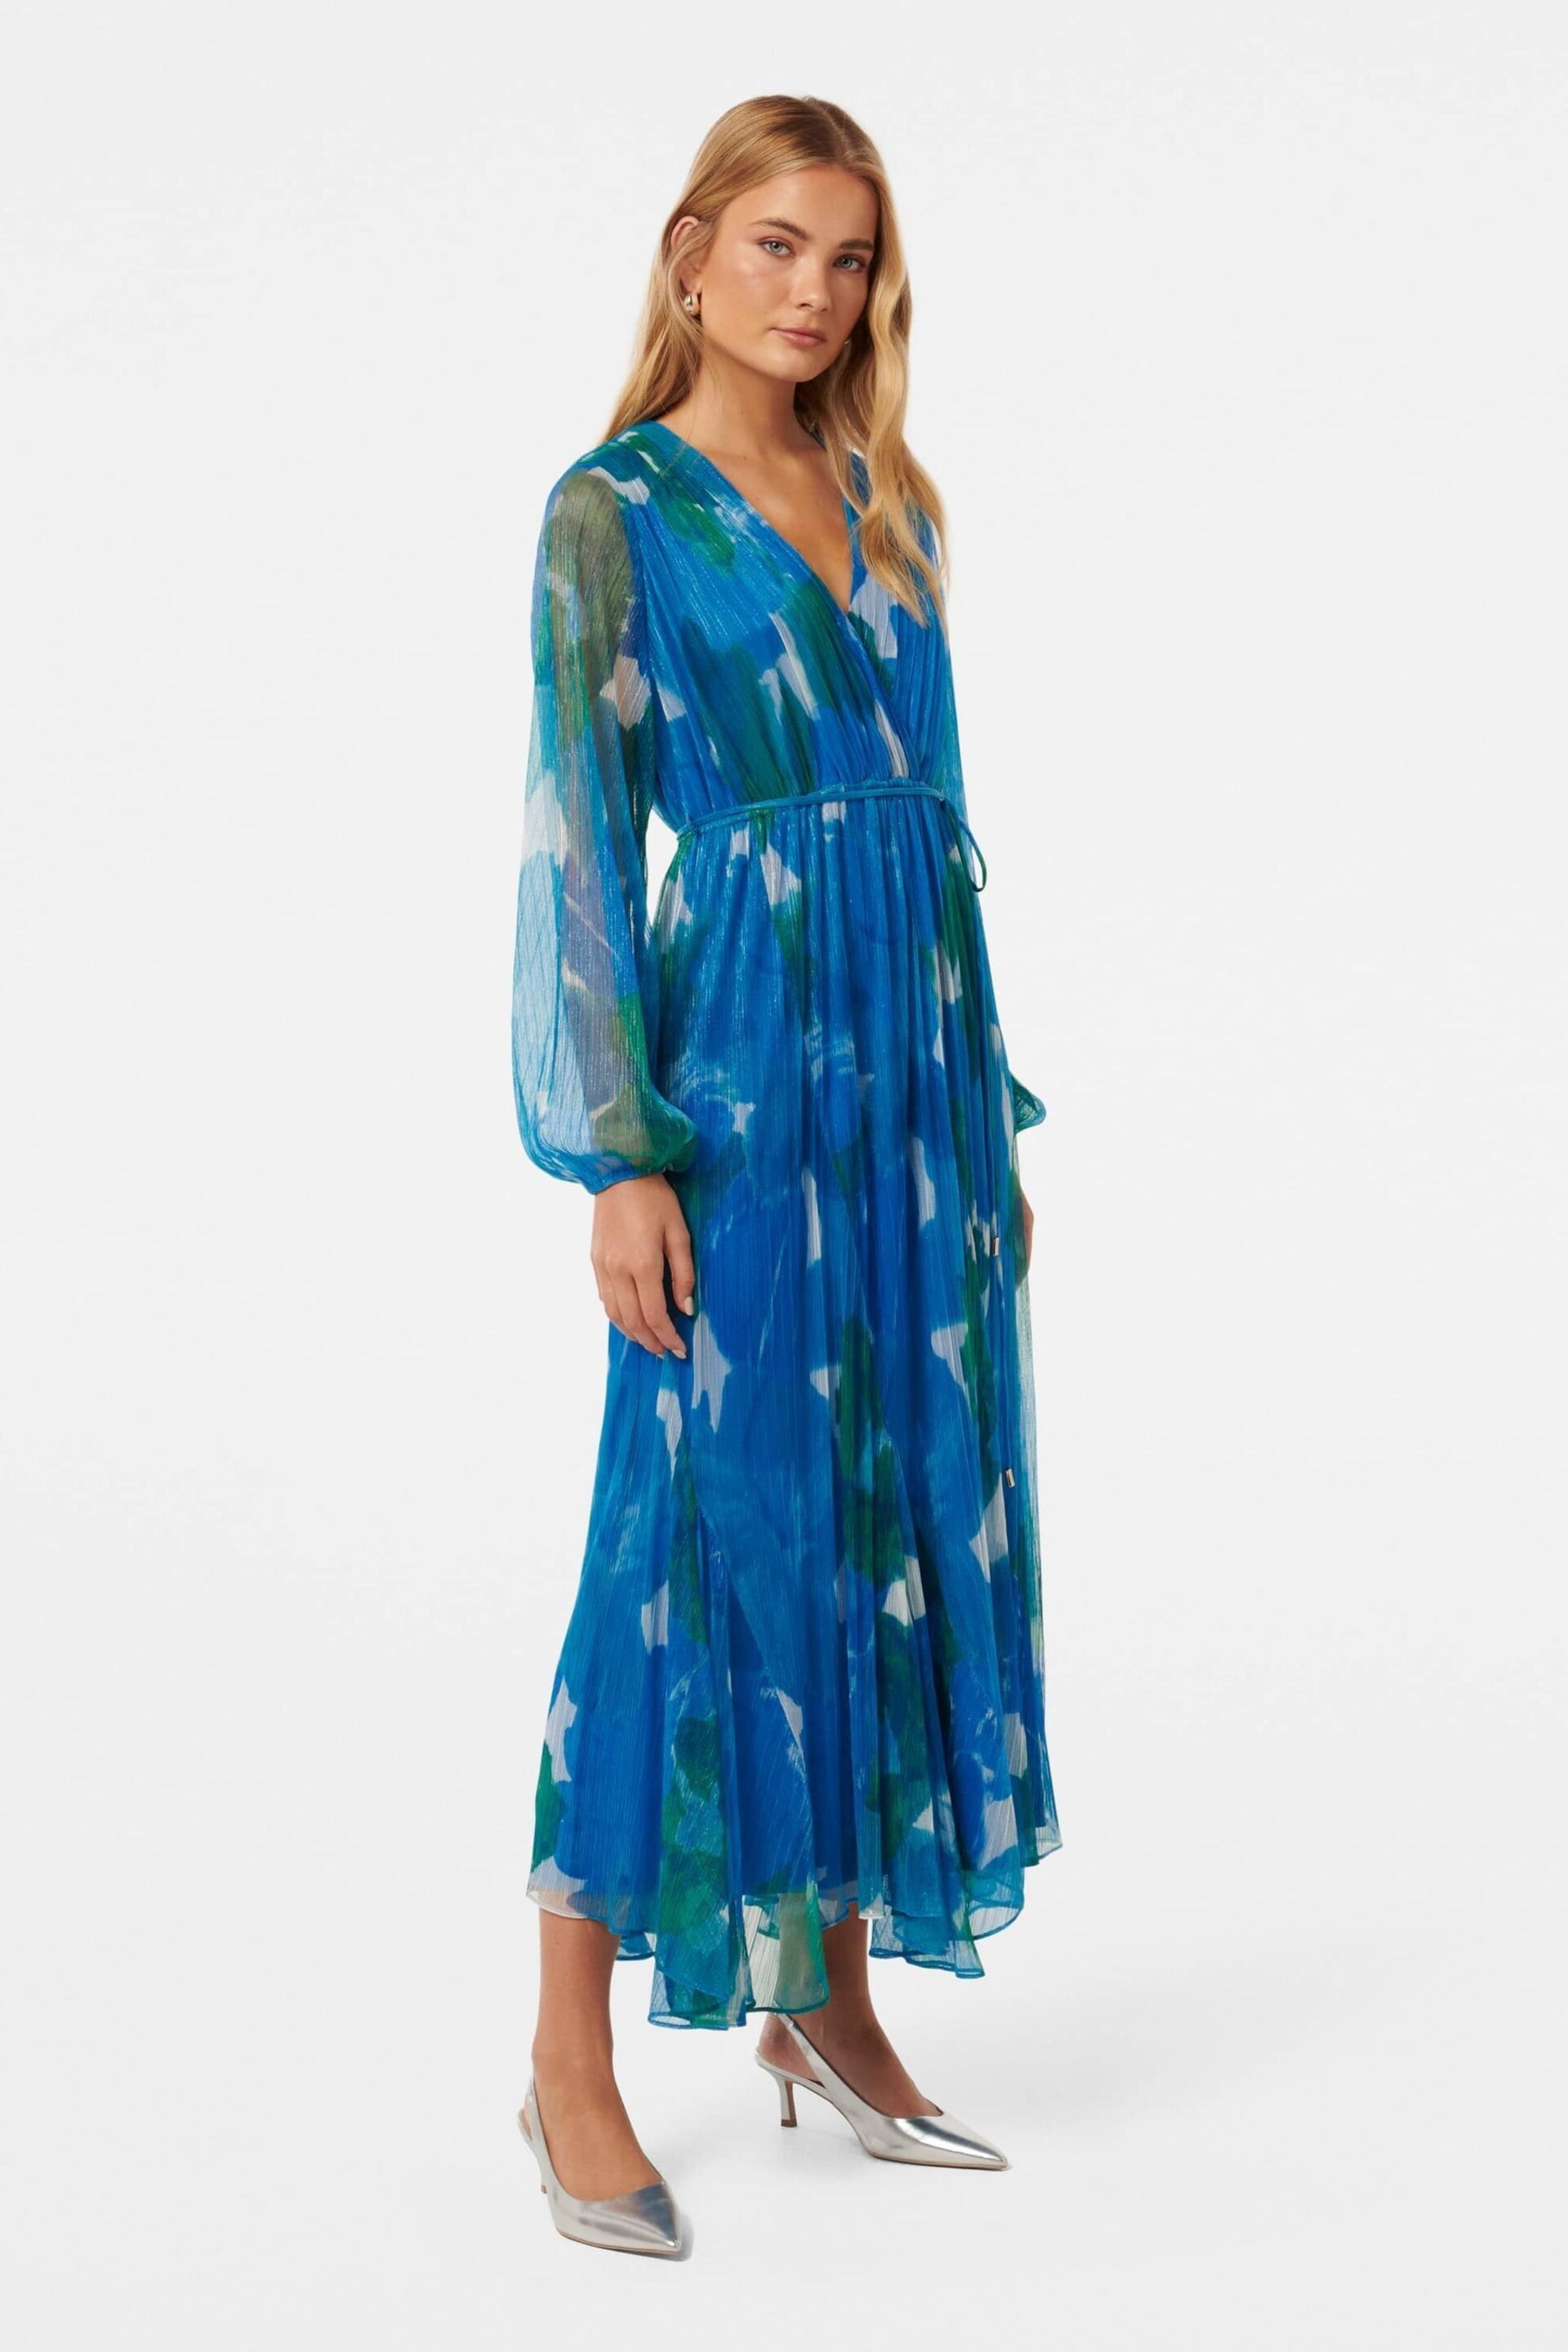 Forever New Blue August Printed Plisse Midi Dress - Image 3 of 4